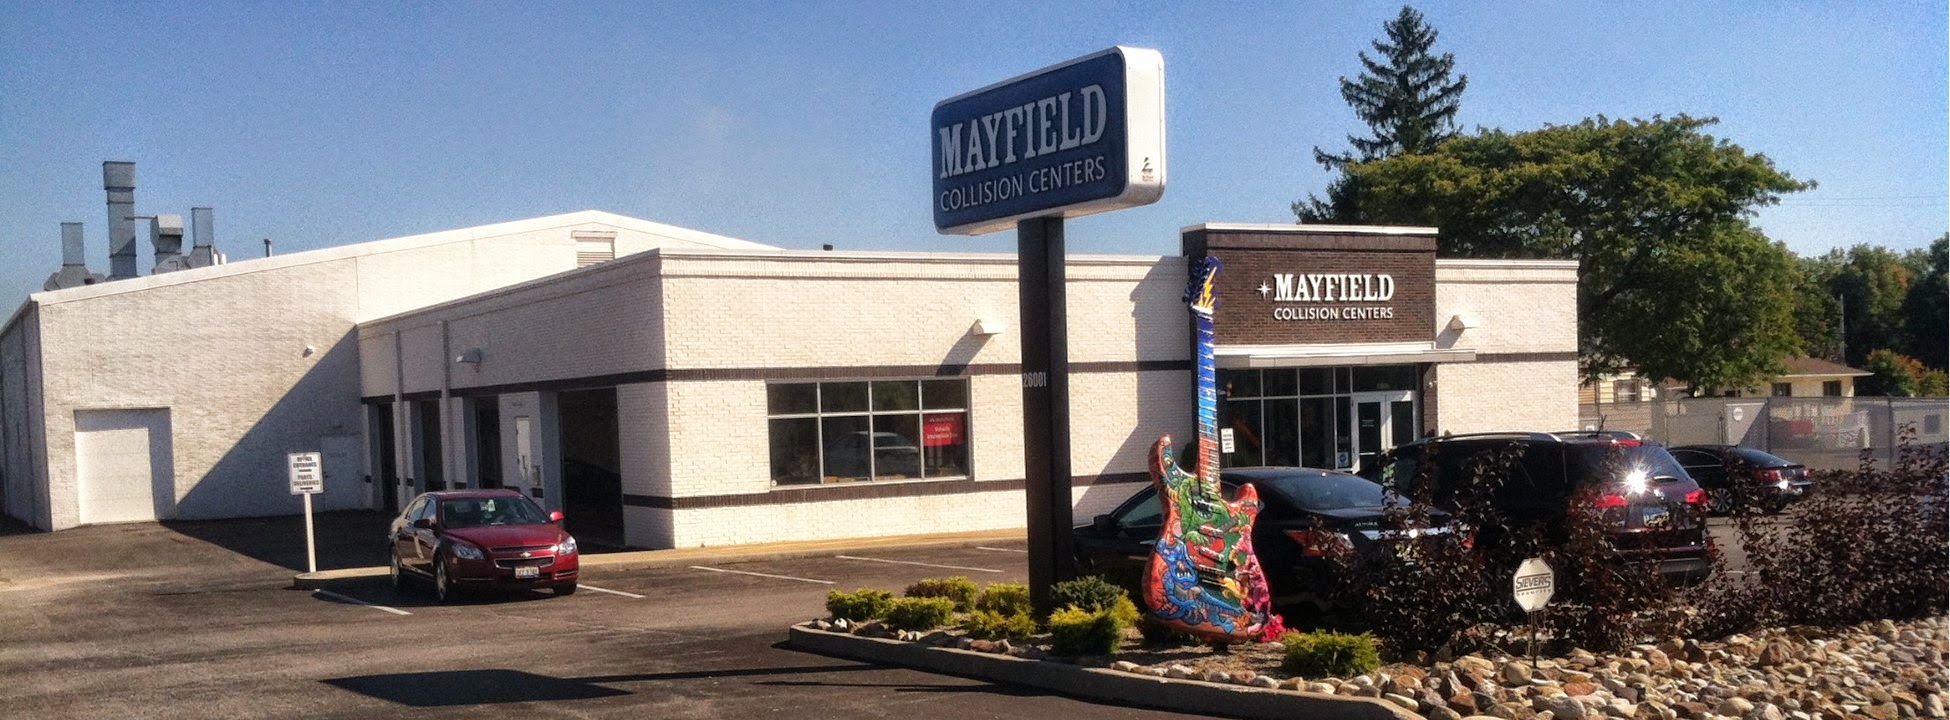 Mayfield Collision Center of Bedford Heights